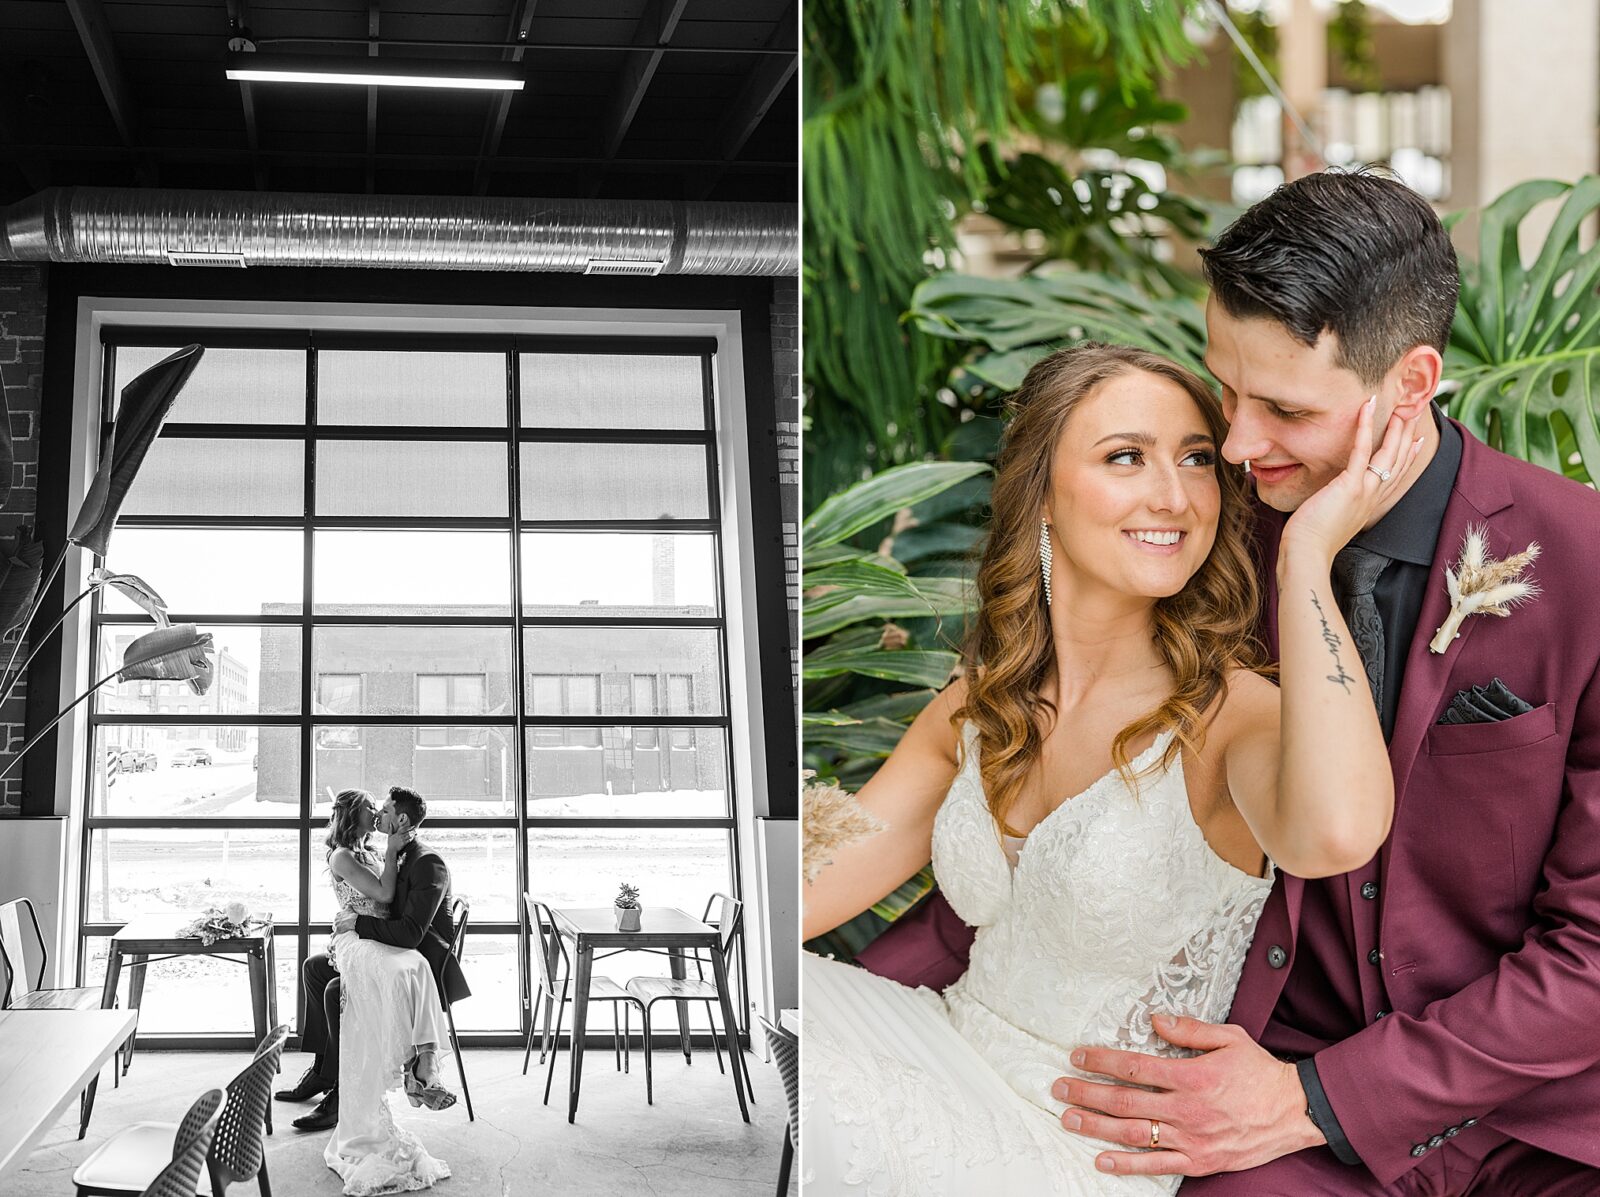 Bride and Groom photos at the The Every Day Kitchen in Regina, Sask